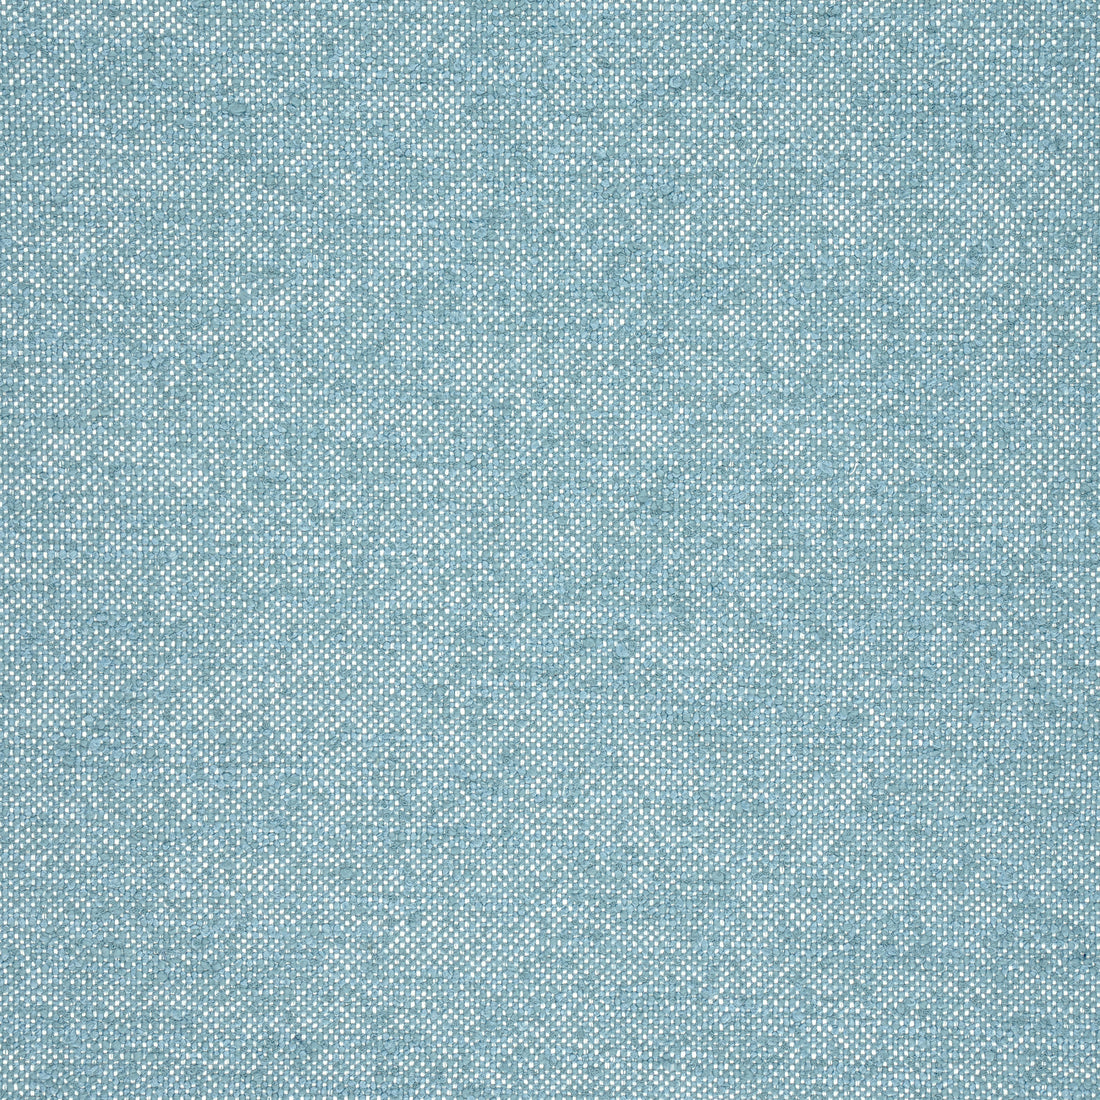 Sasso fabric in ocean color - pattern number W77109 - by Thibaut in the Veneto collection